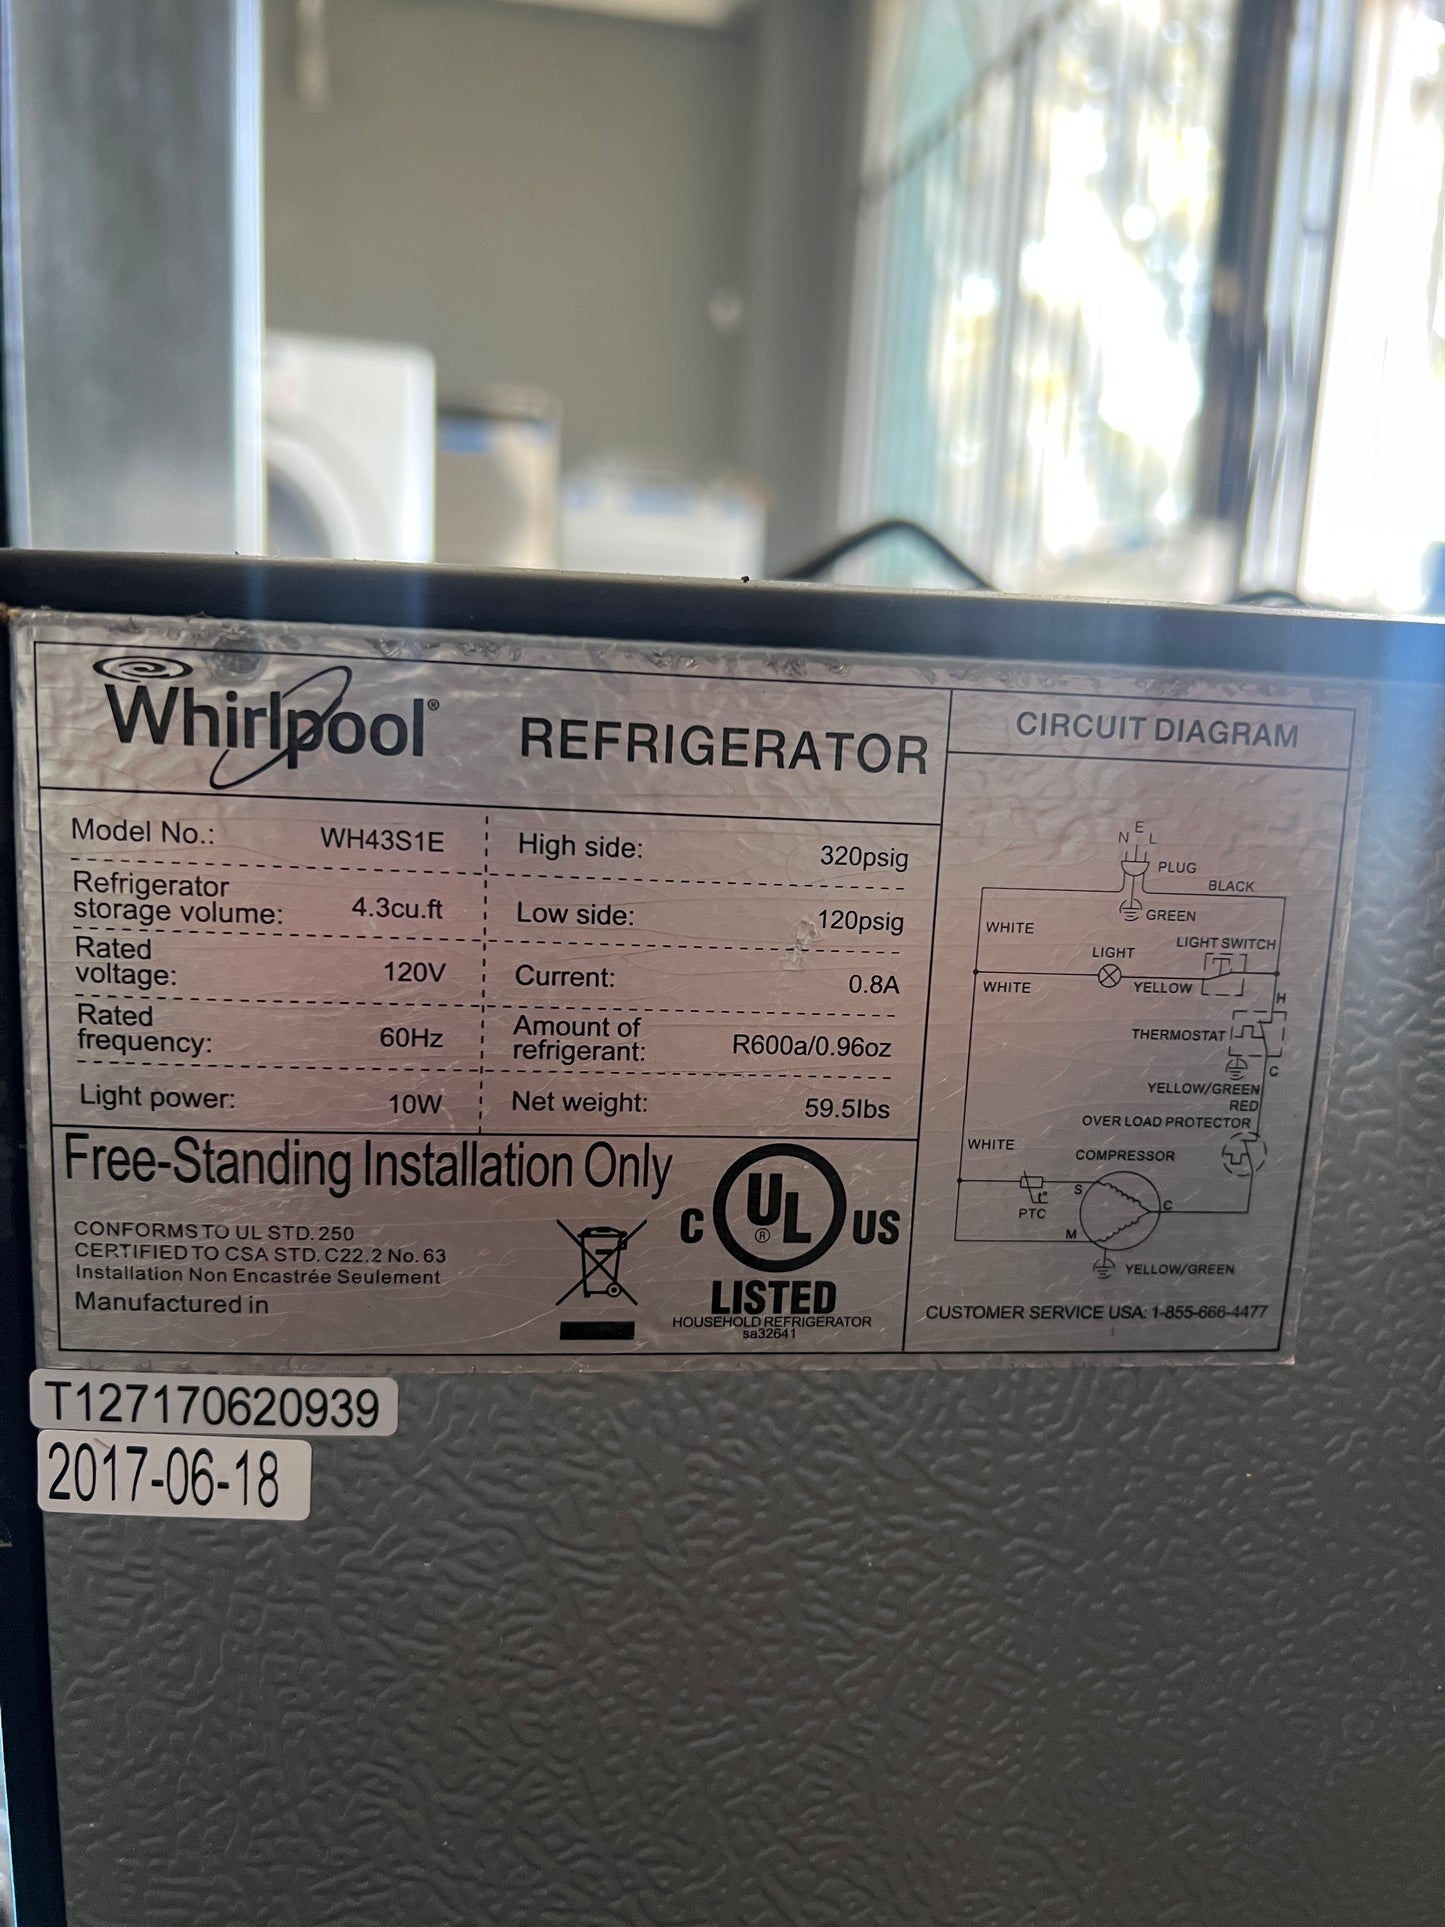 Whirlpool 4.3 CuFt Mini Refrigerator in Stainless Steel, WH43S1E, 999462